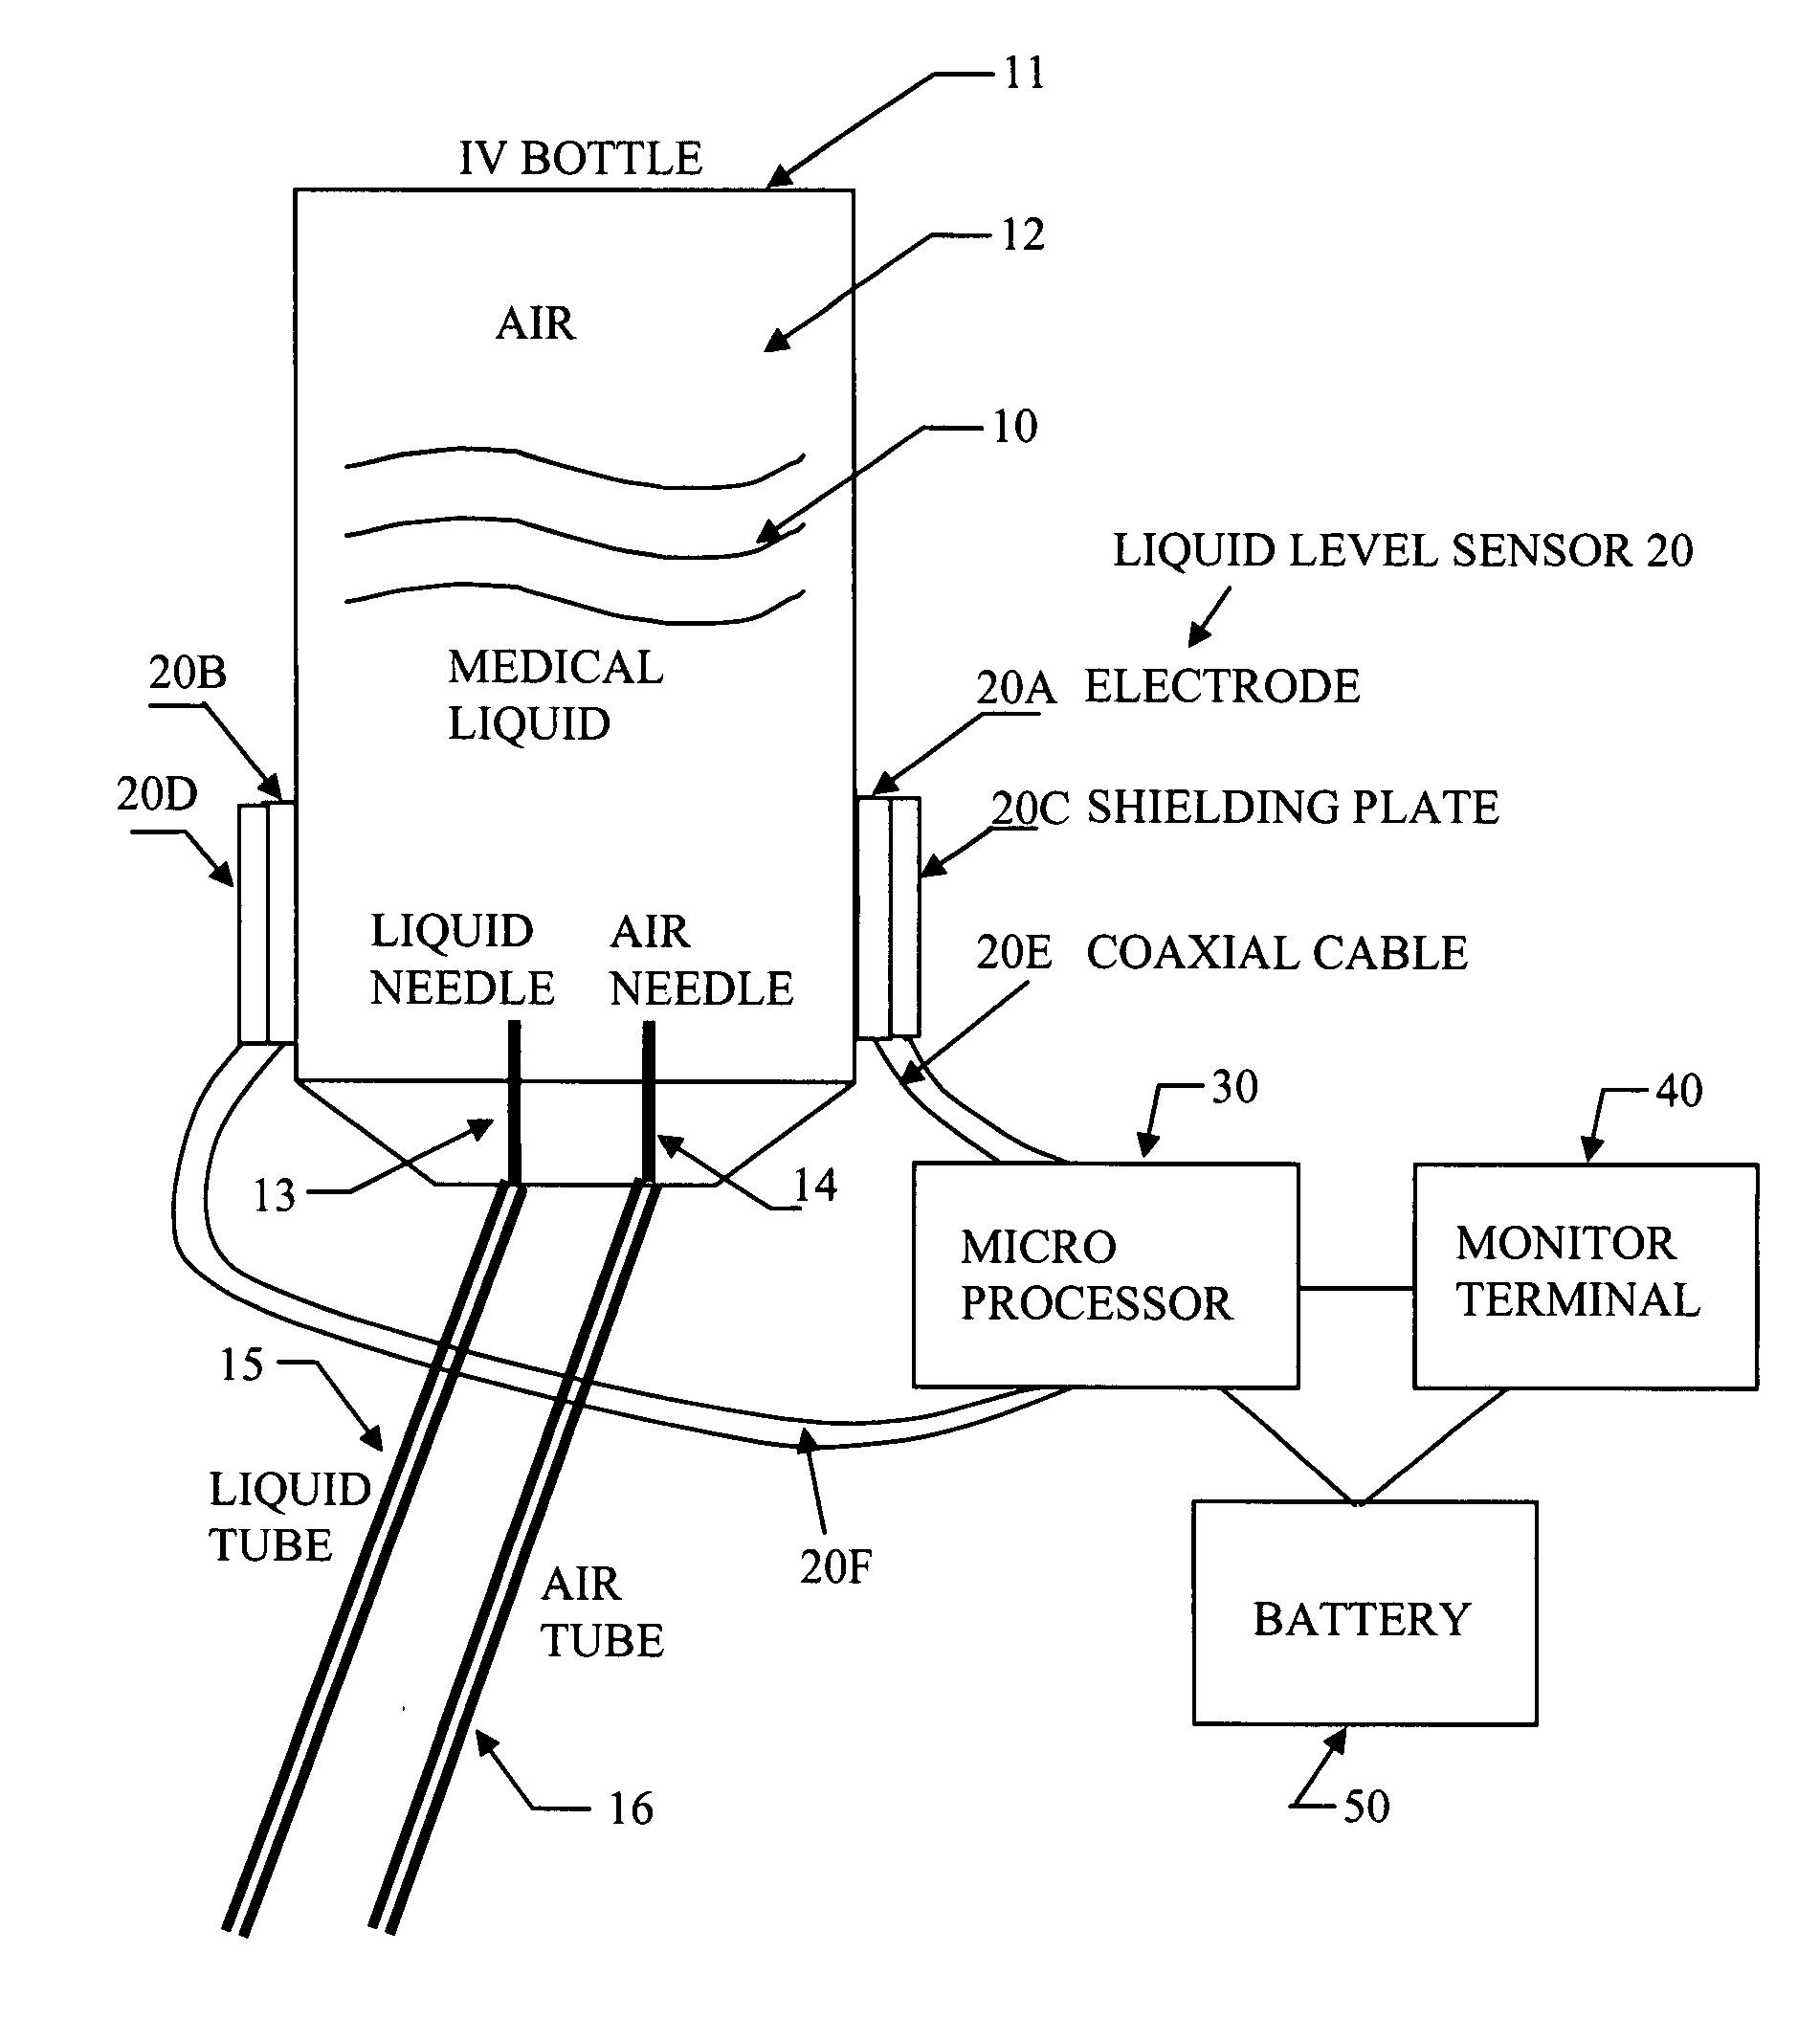 Portable IV infusion mornitoring system